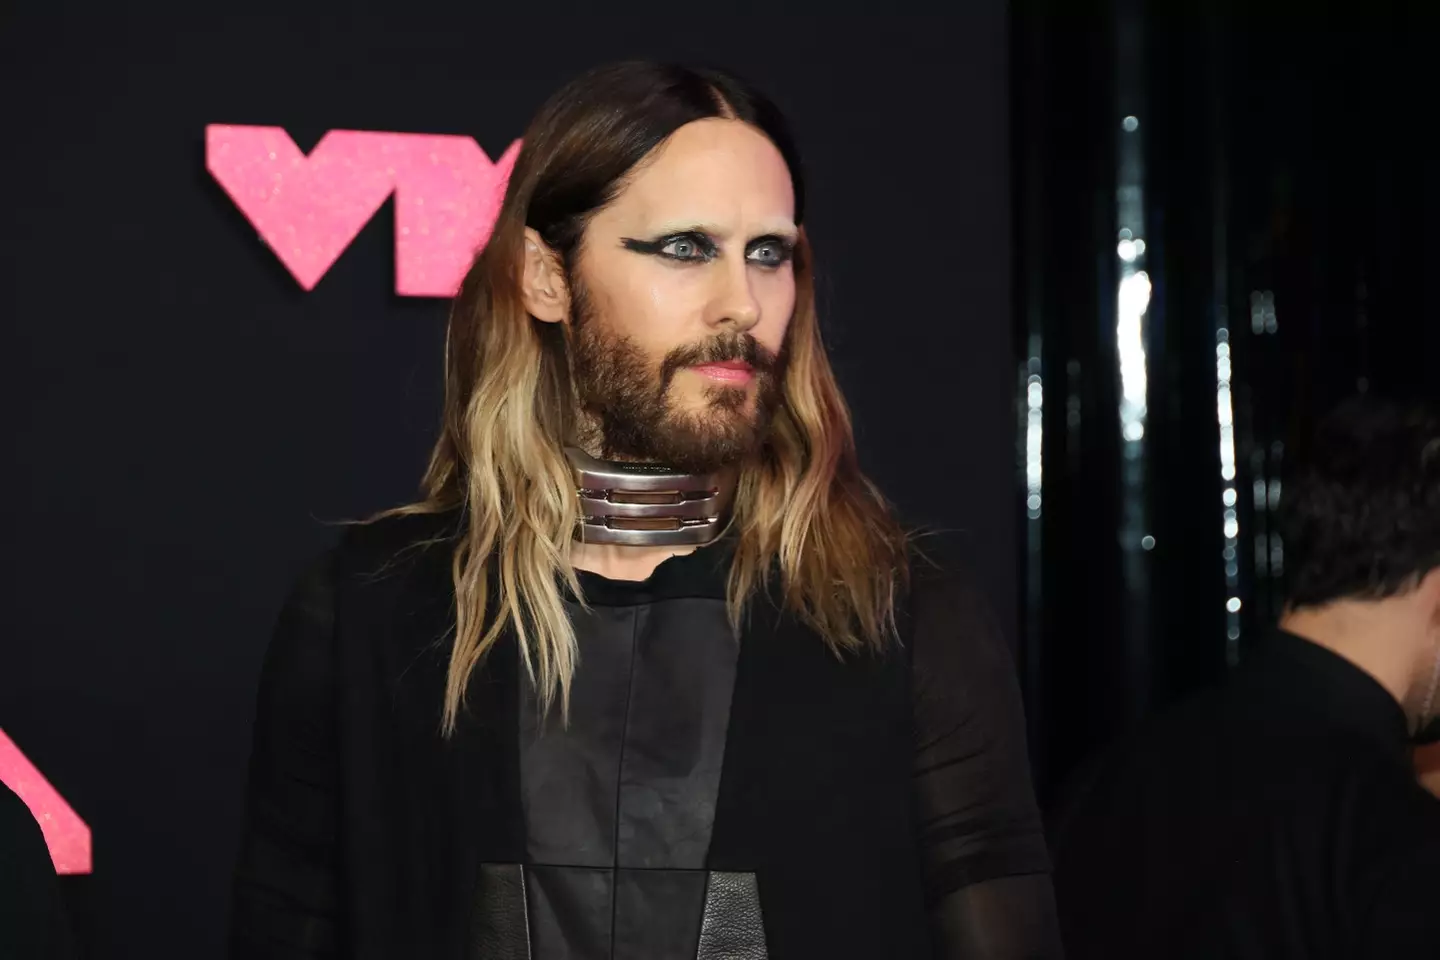 The 30 Seconds to Mars singer was aware of drugs from an early age.